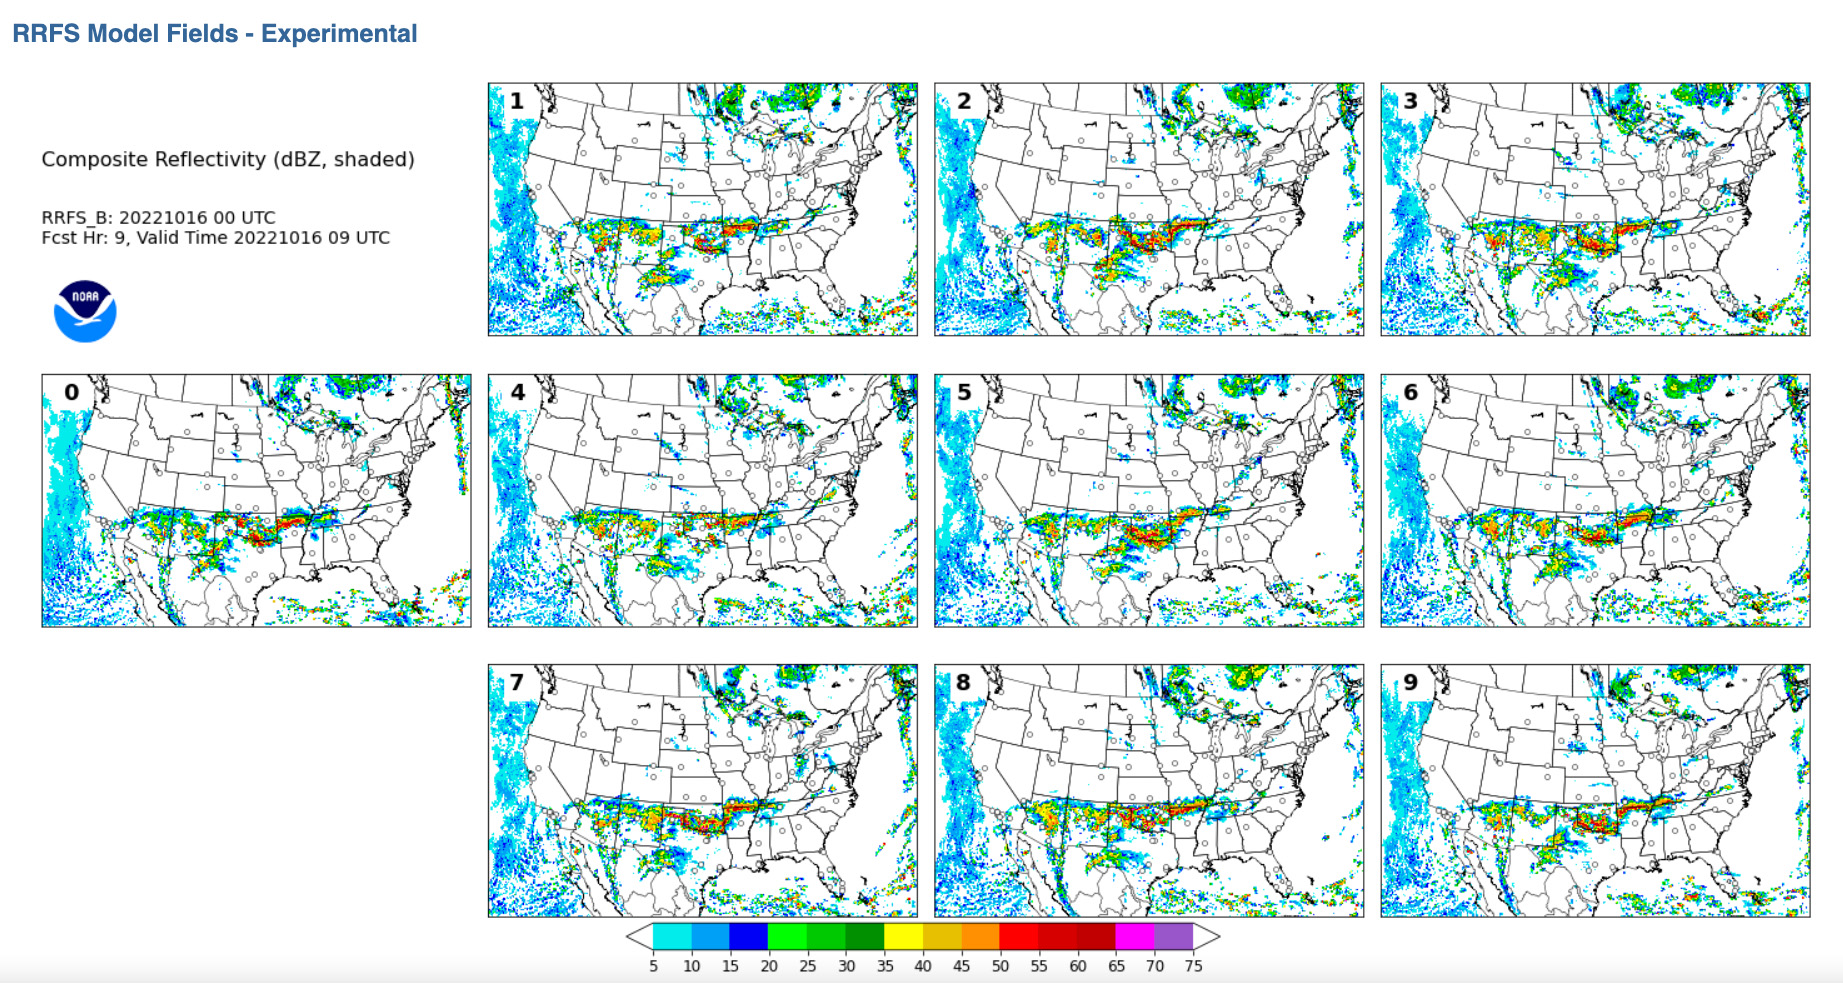 Ensemble forecasts are a group of forecasts valid over the same time period that either start from different initial states, use different models, or both.